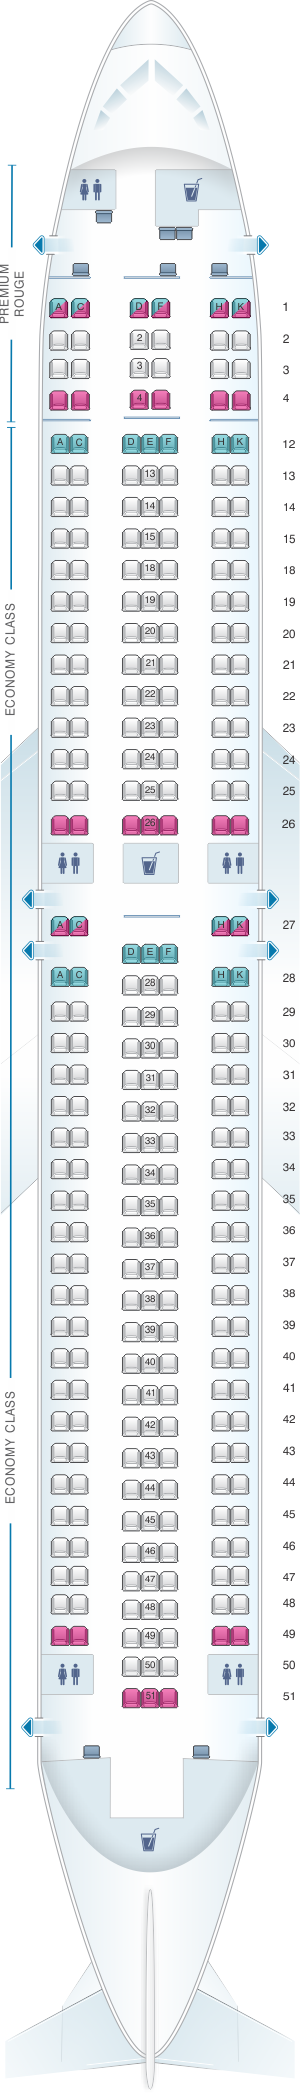 Seat map for Air Canada Boeing B767 300ER (763) Rouge